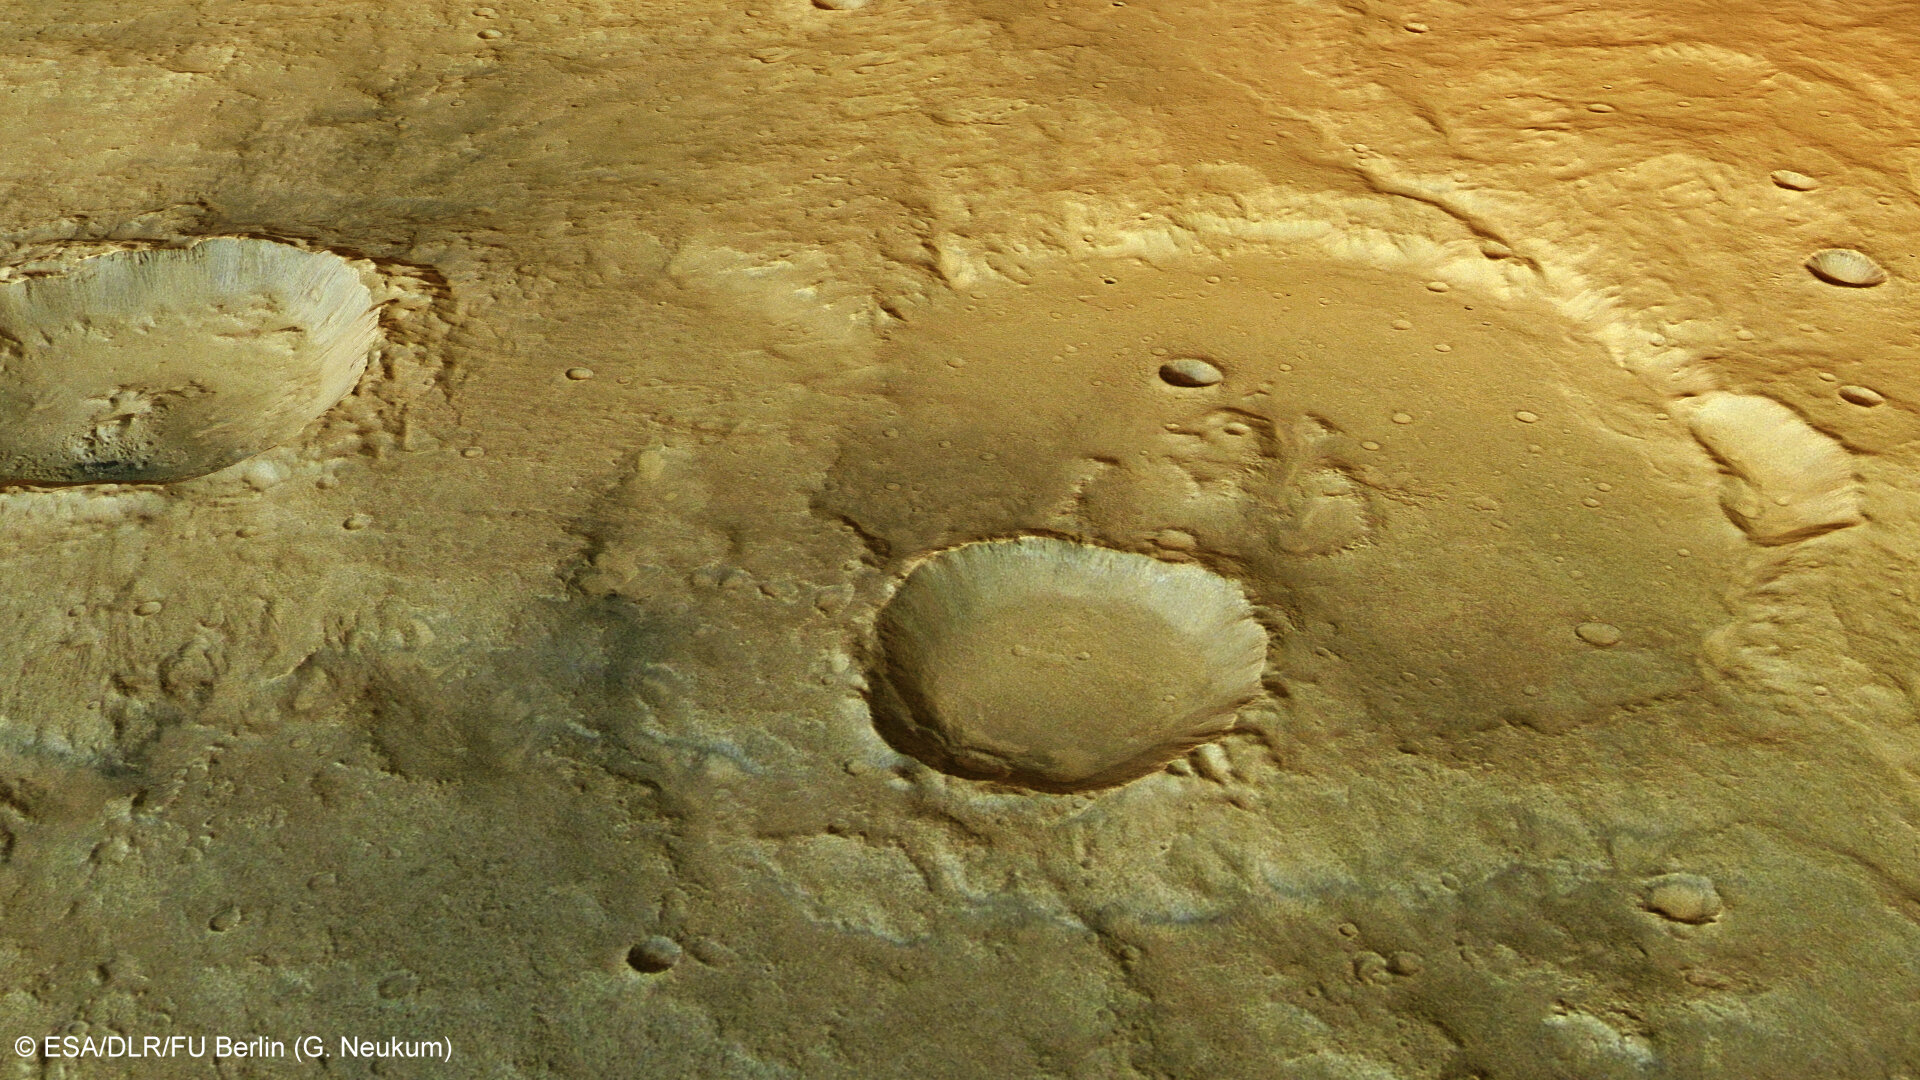 Deformation in a flooded crater